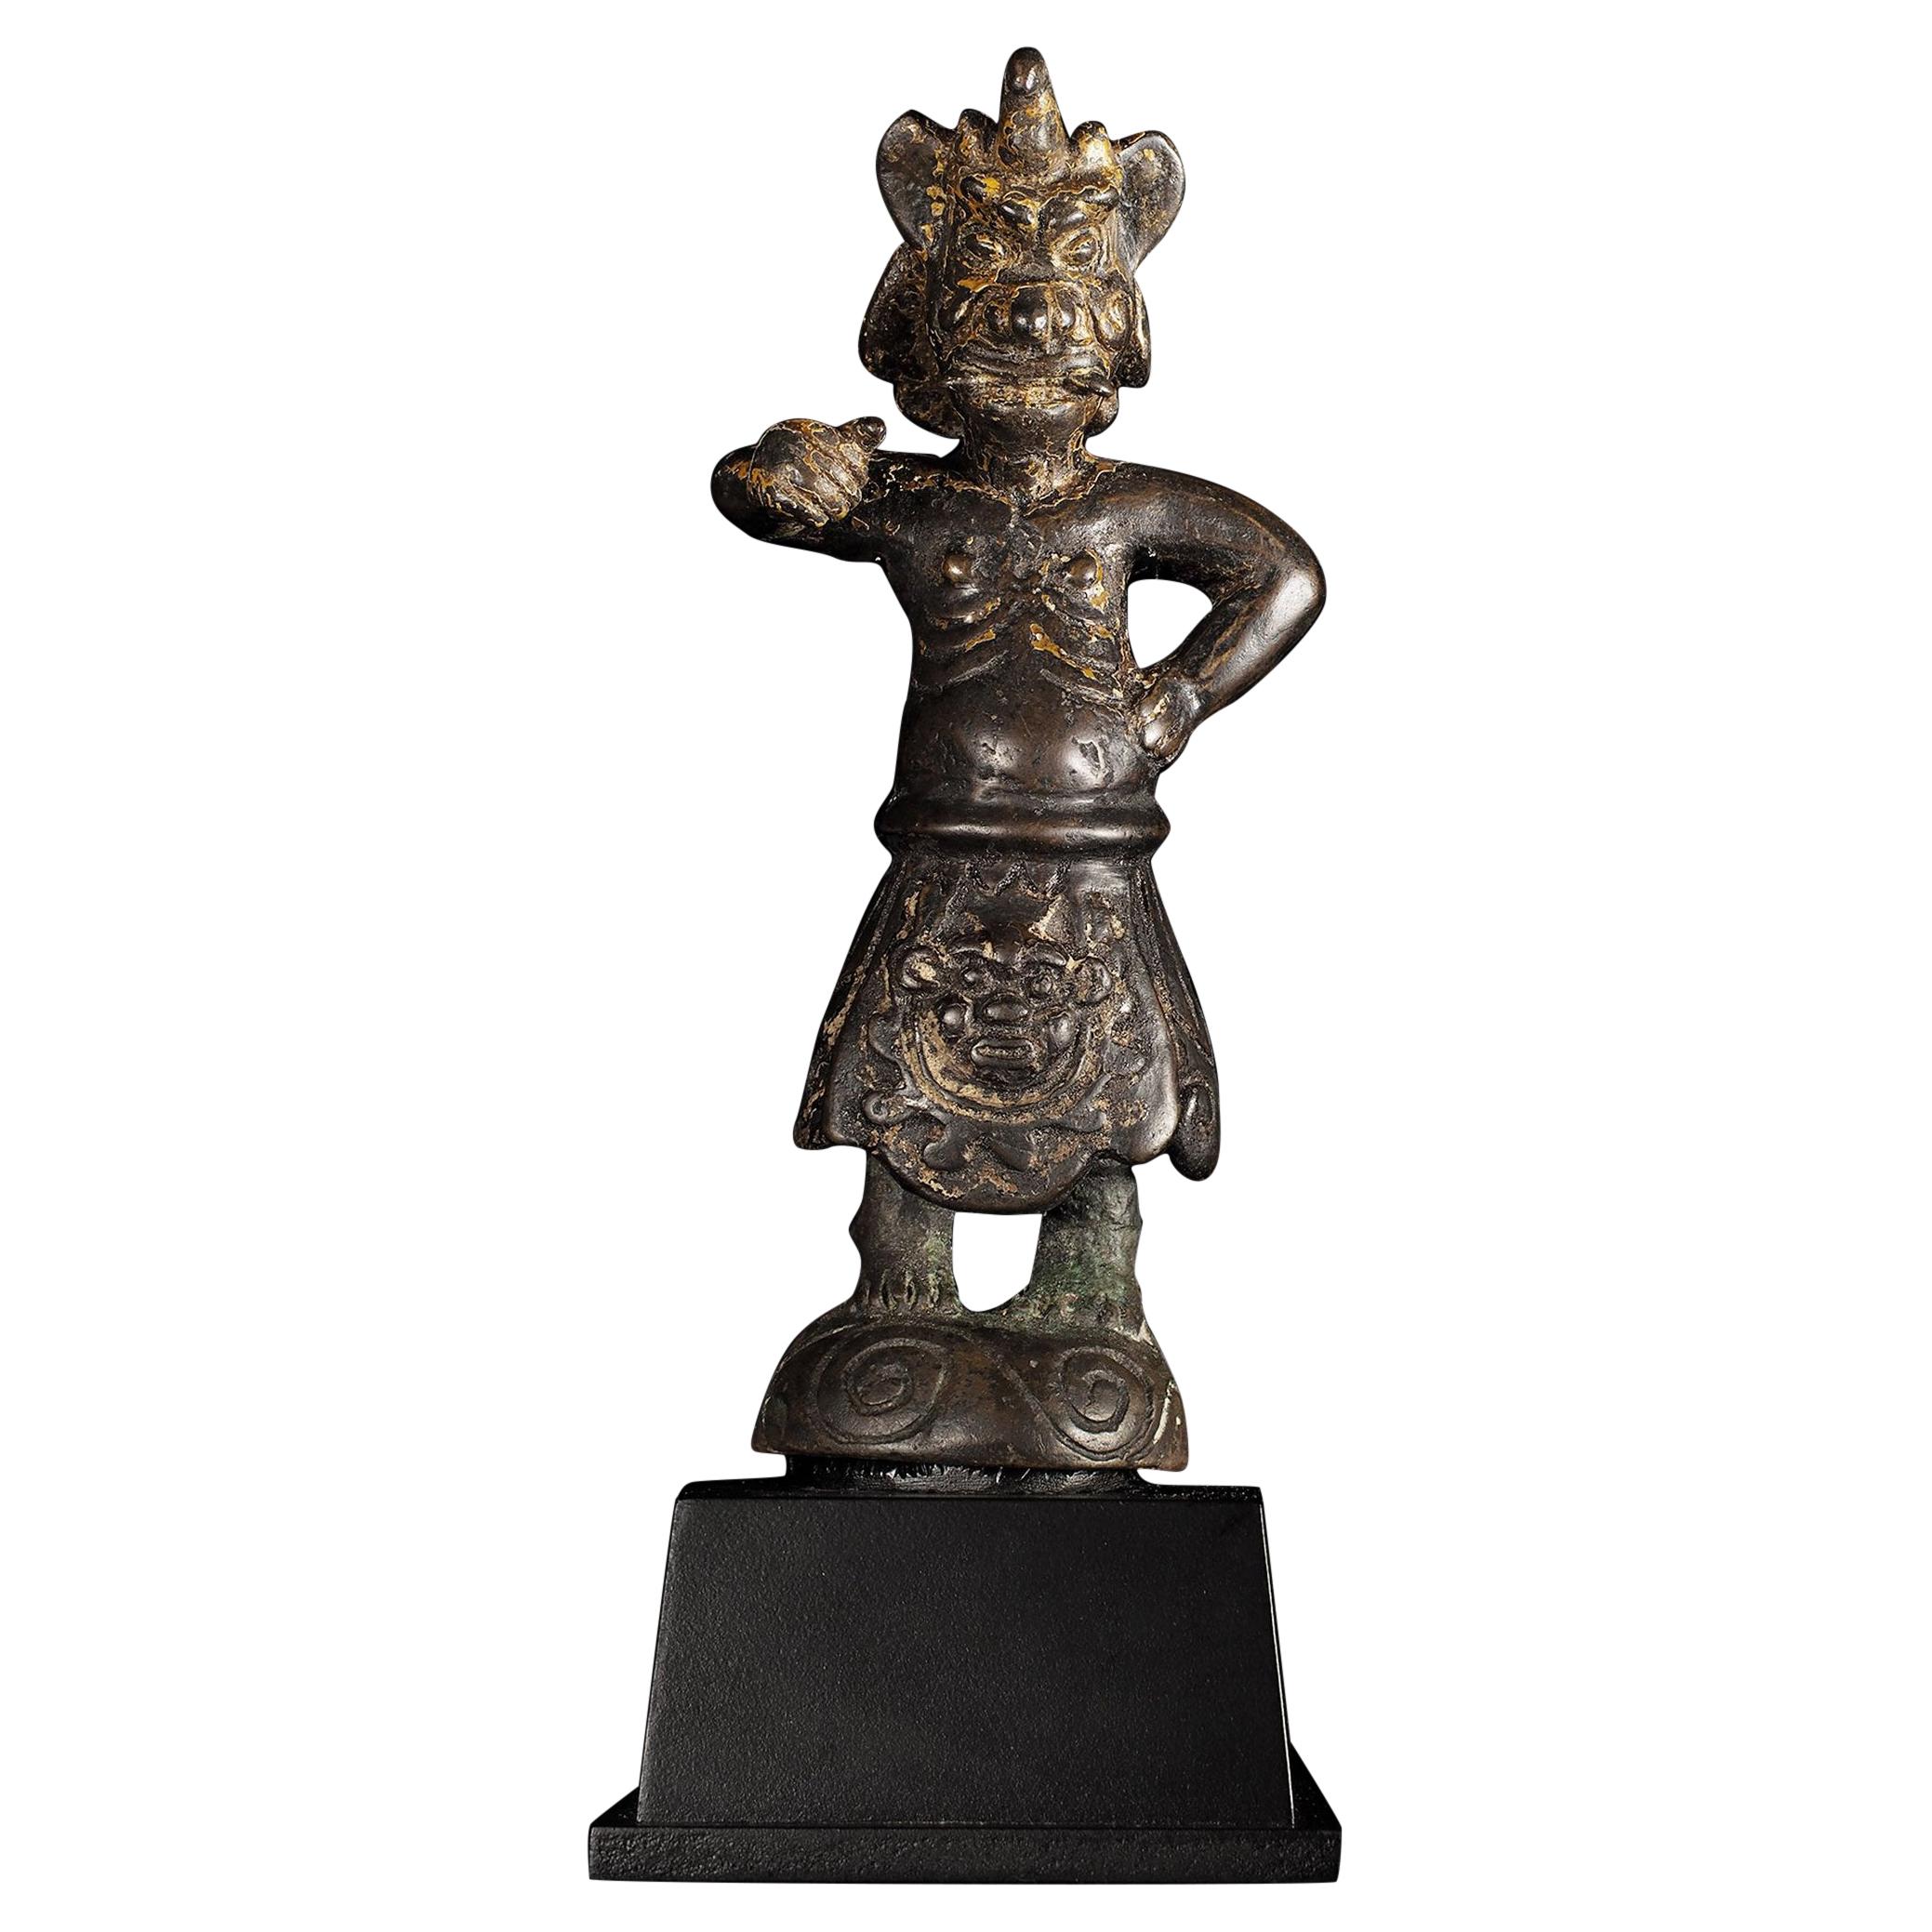 15thC or Earlier Chinese Guardian Figure - 9459 For Sale